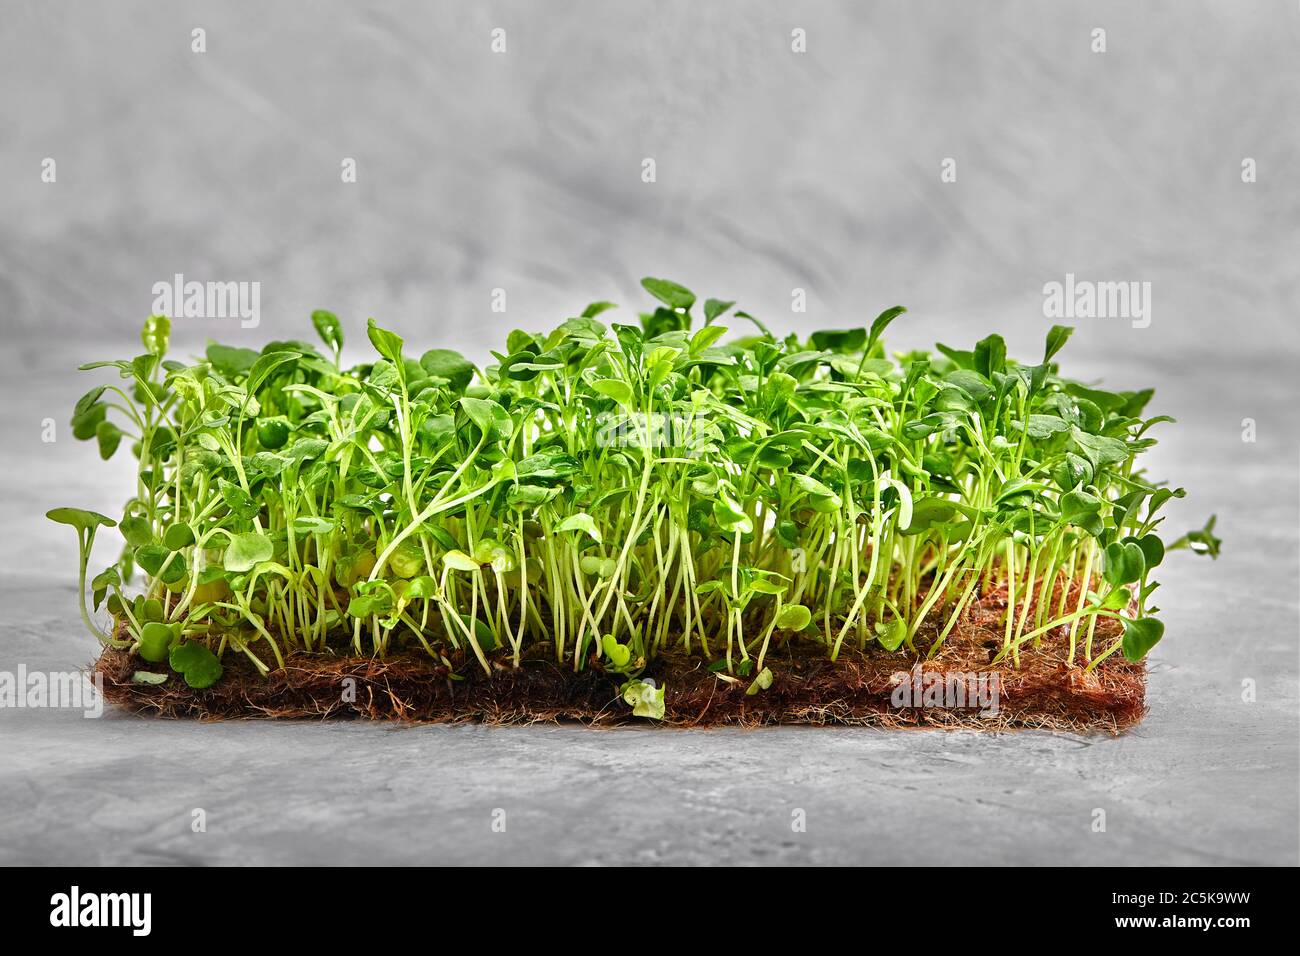 Peas microgreens with seeds and roots. Sprouting Micro greens on Jute Microgreens Grow Mats. Sprouting Microgreens on the Hemp Biodegradable Mats Stock Photo